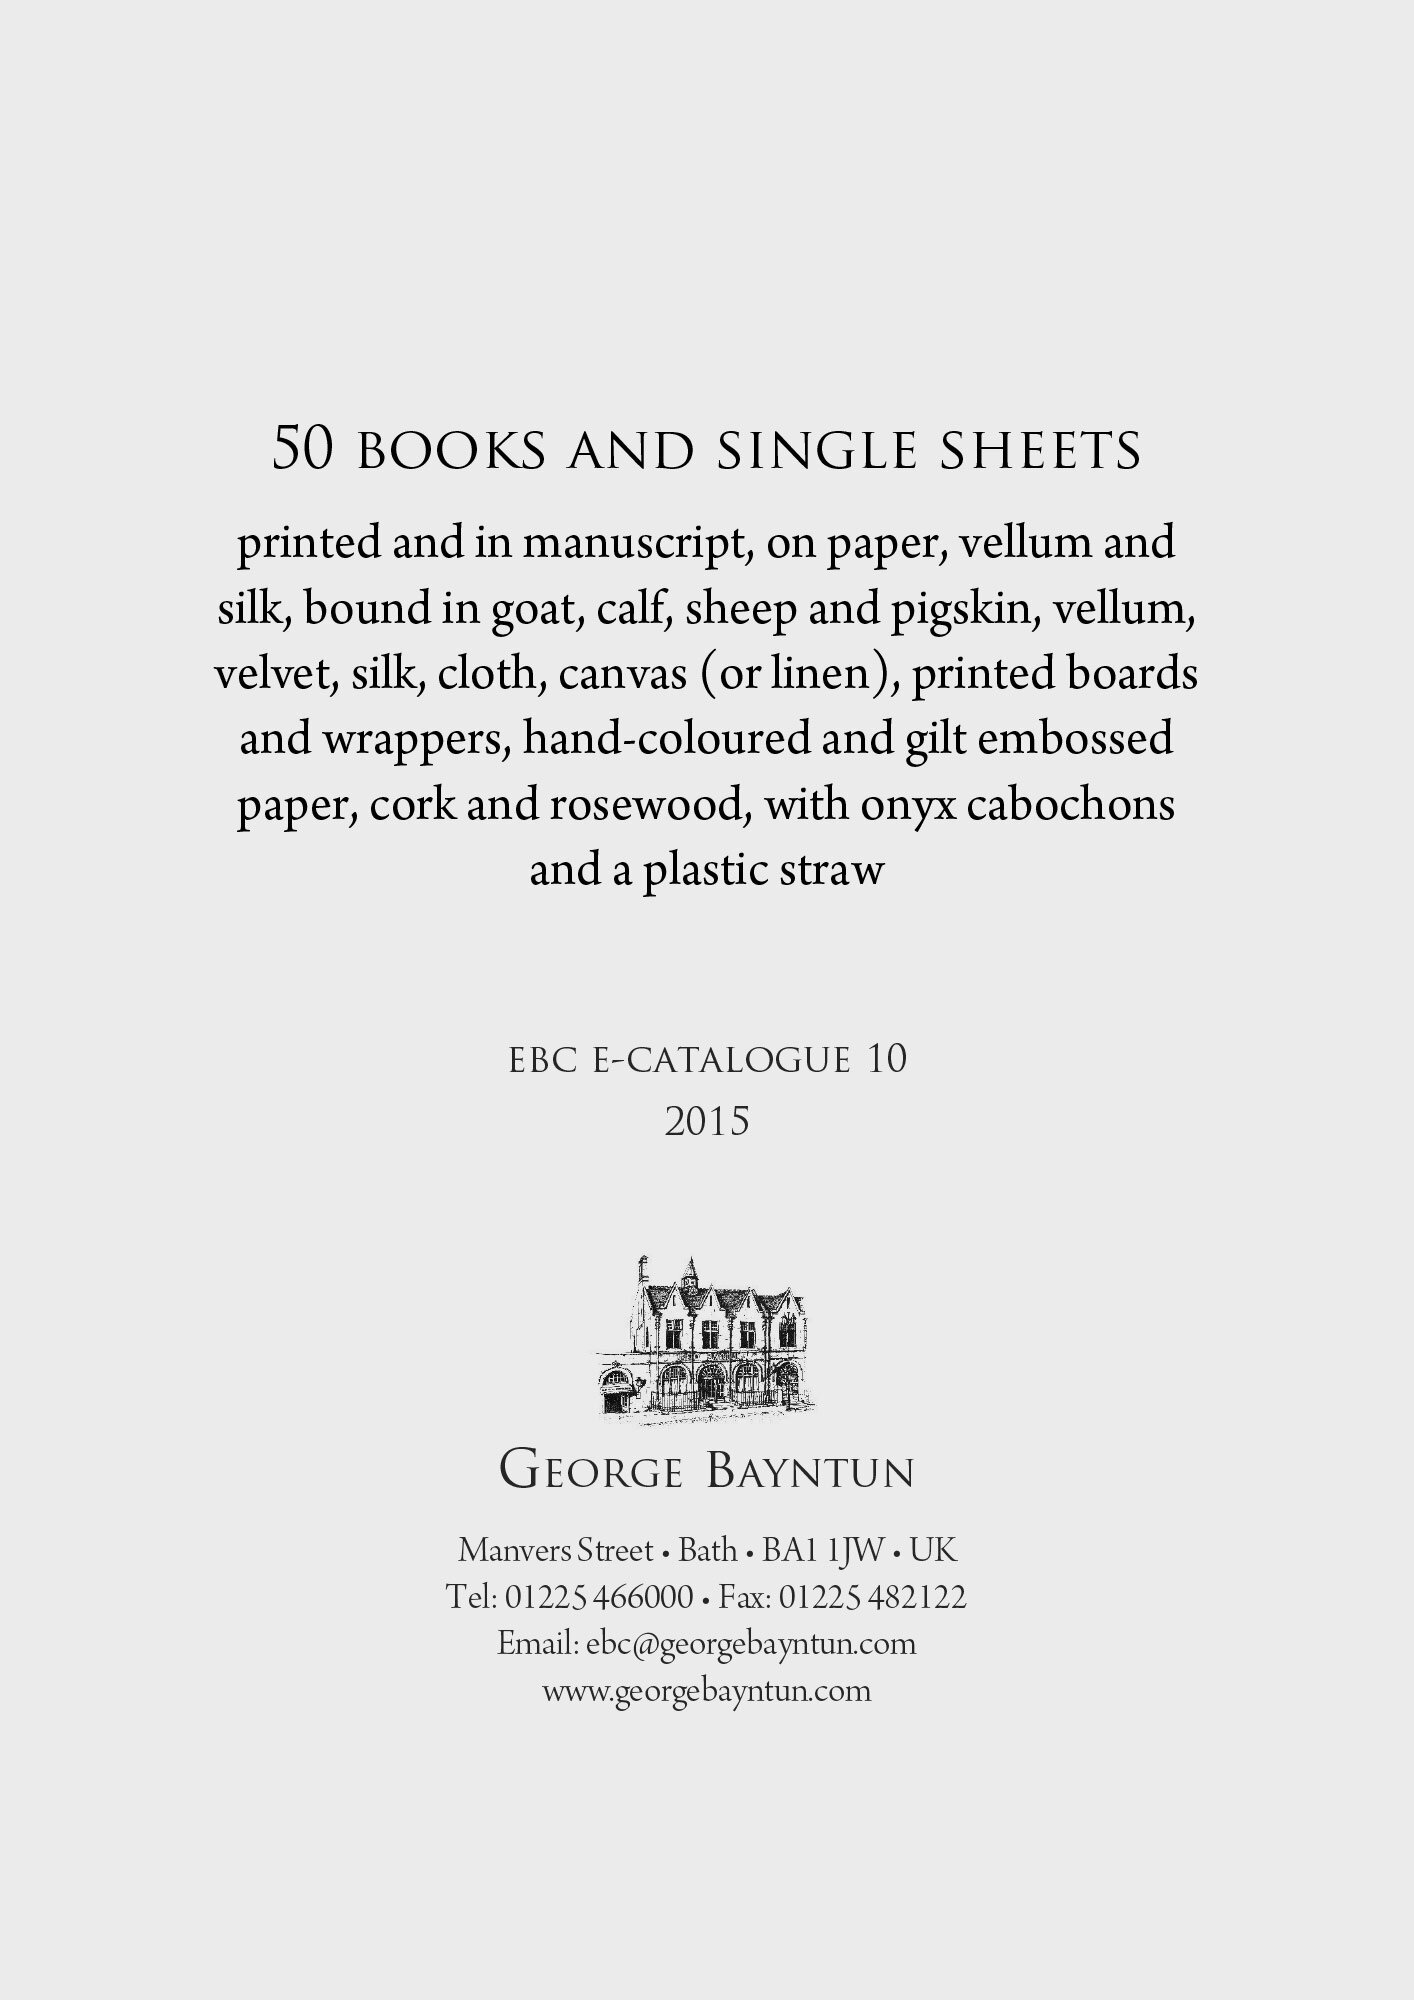 50 books and single sheets